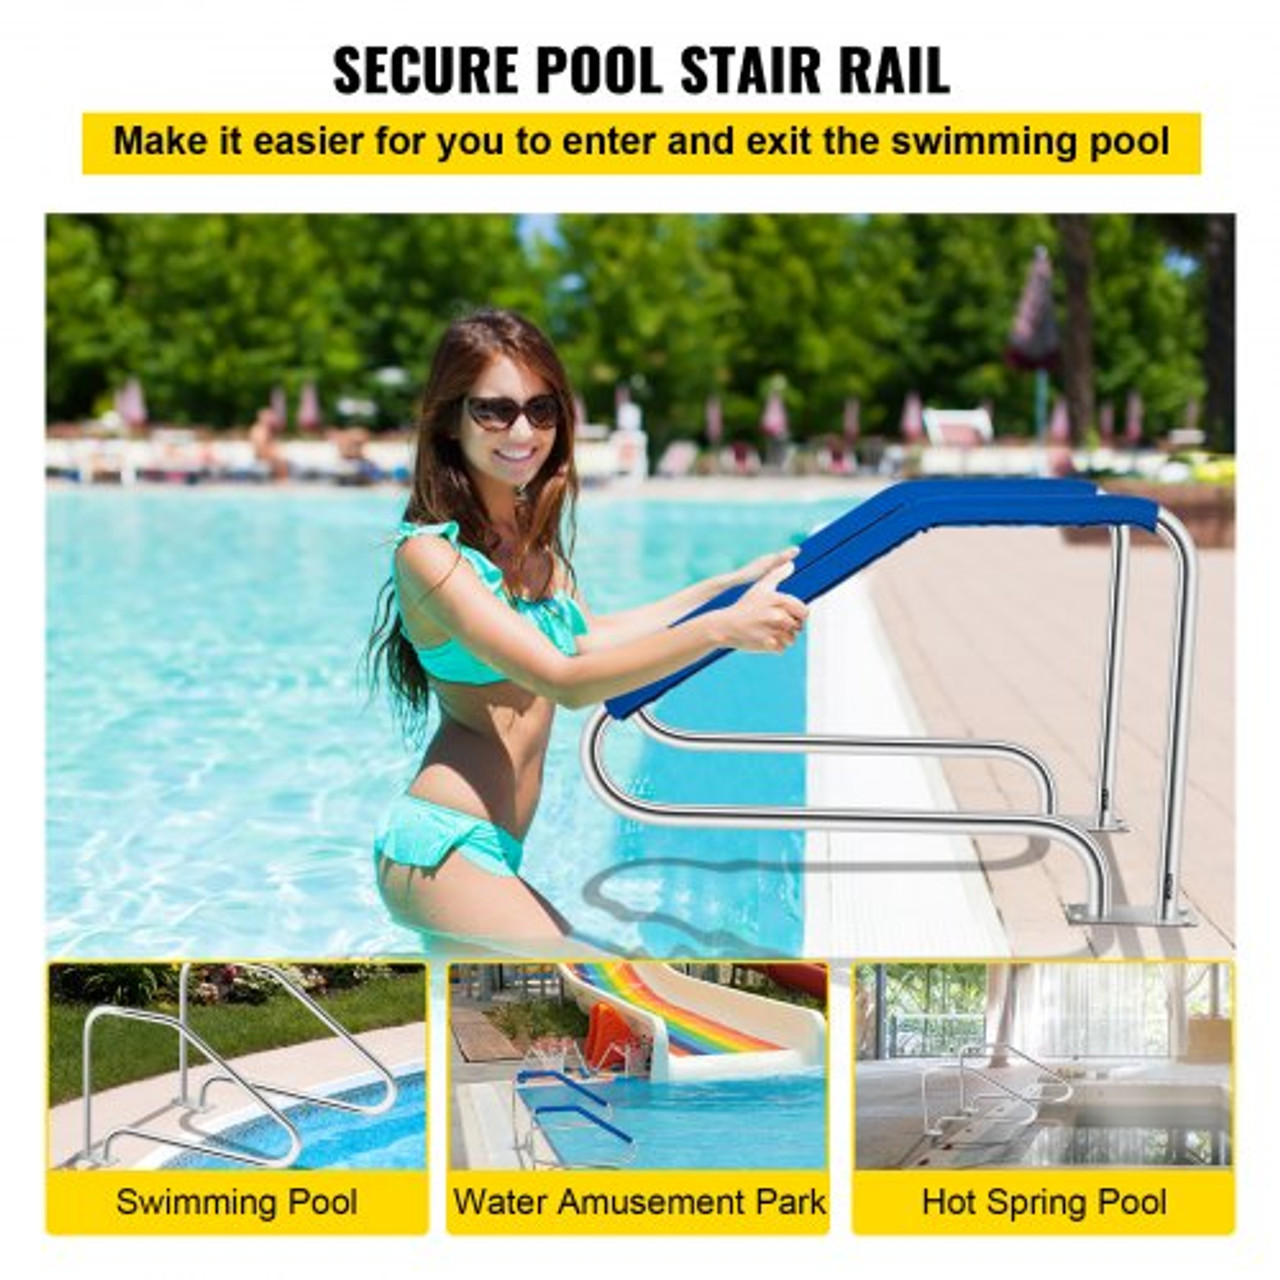 Pool Handrail, 49.4" x 34" Swimming Pool Stair Rail, 304 Stainless Steel Stair Pool Hand Rail Rated 375lbs Load Capacity, Pool Rail with Quick Mount Base Plate, and Complete Mounting Accessories